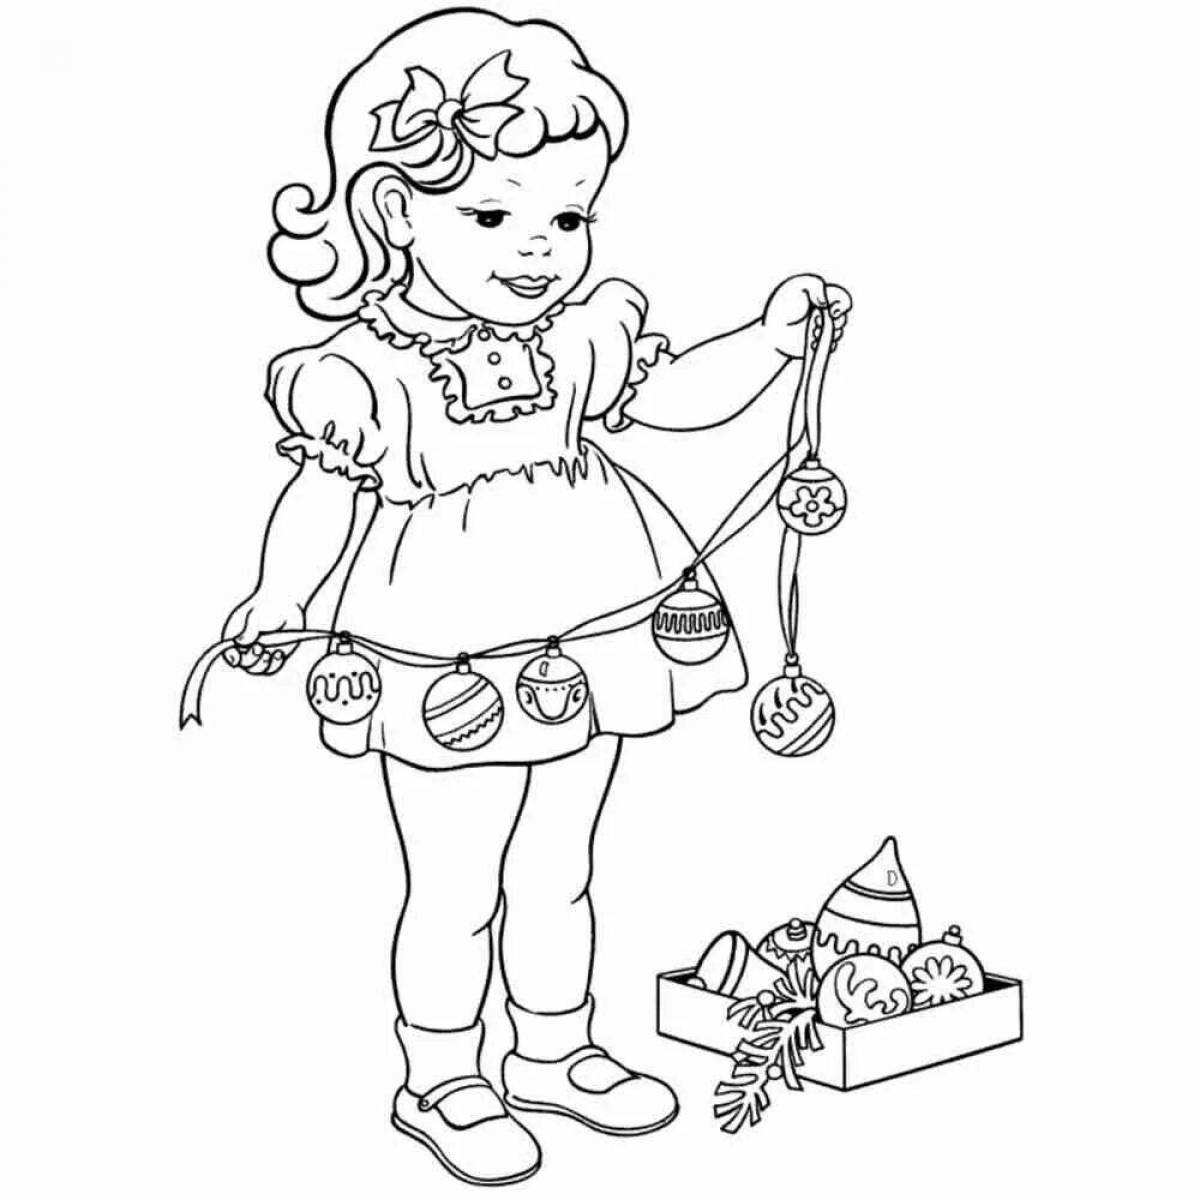 Dreamy Christmas coloring book for girls